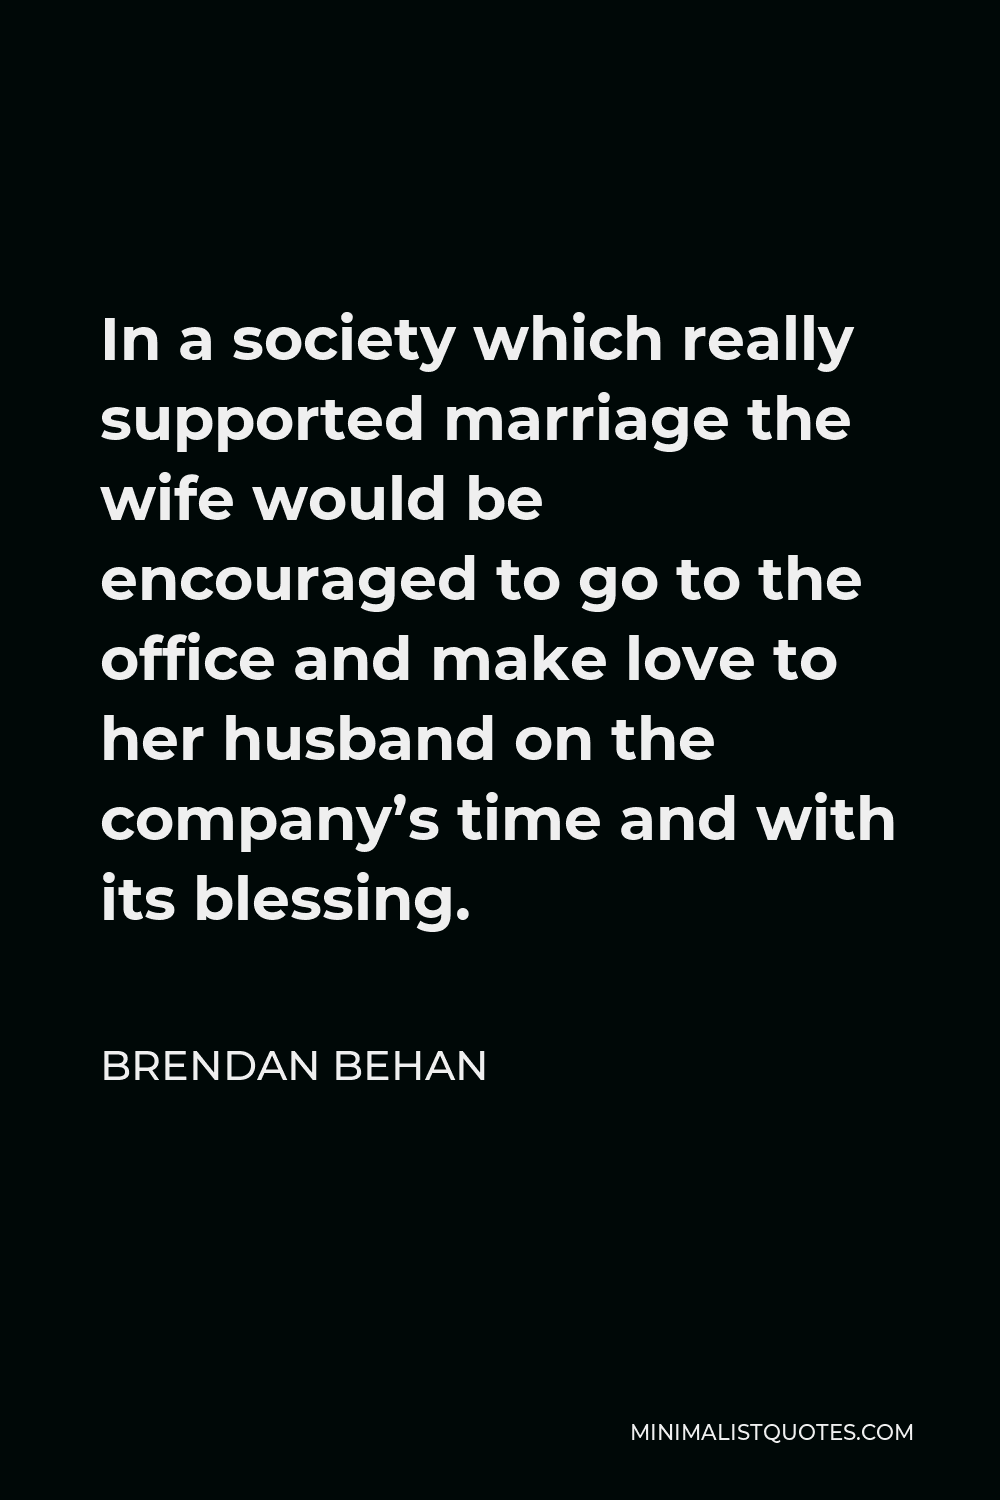 Brendan Behan Quote - In a society which really supported marriage the wife would be encouraged to go to the office and make love to her husband on the company’s time and with its blessing.